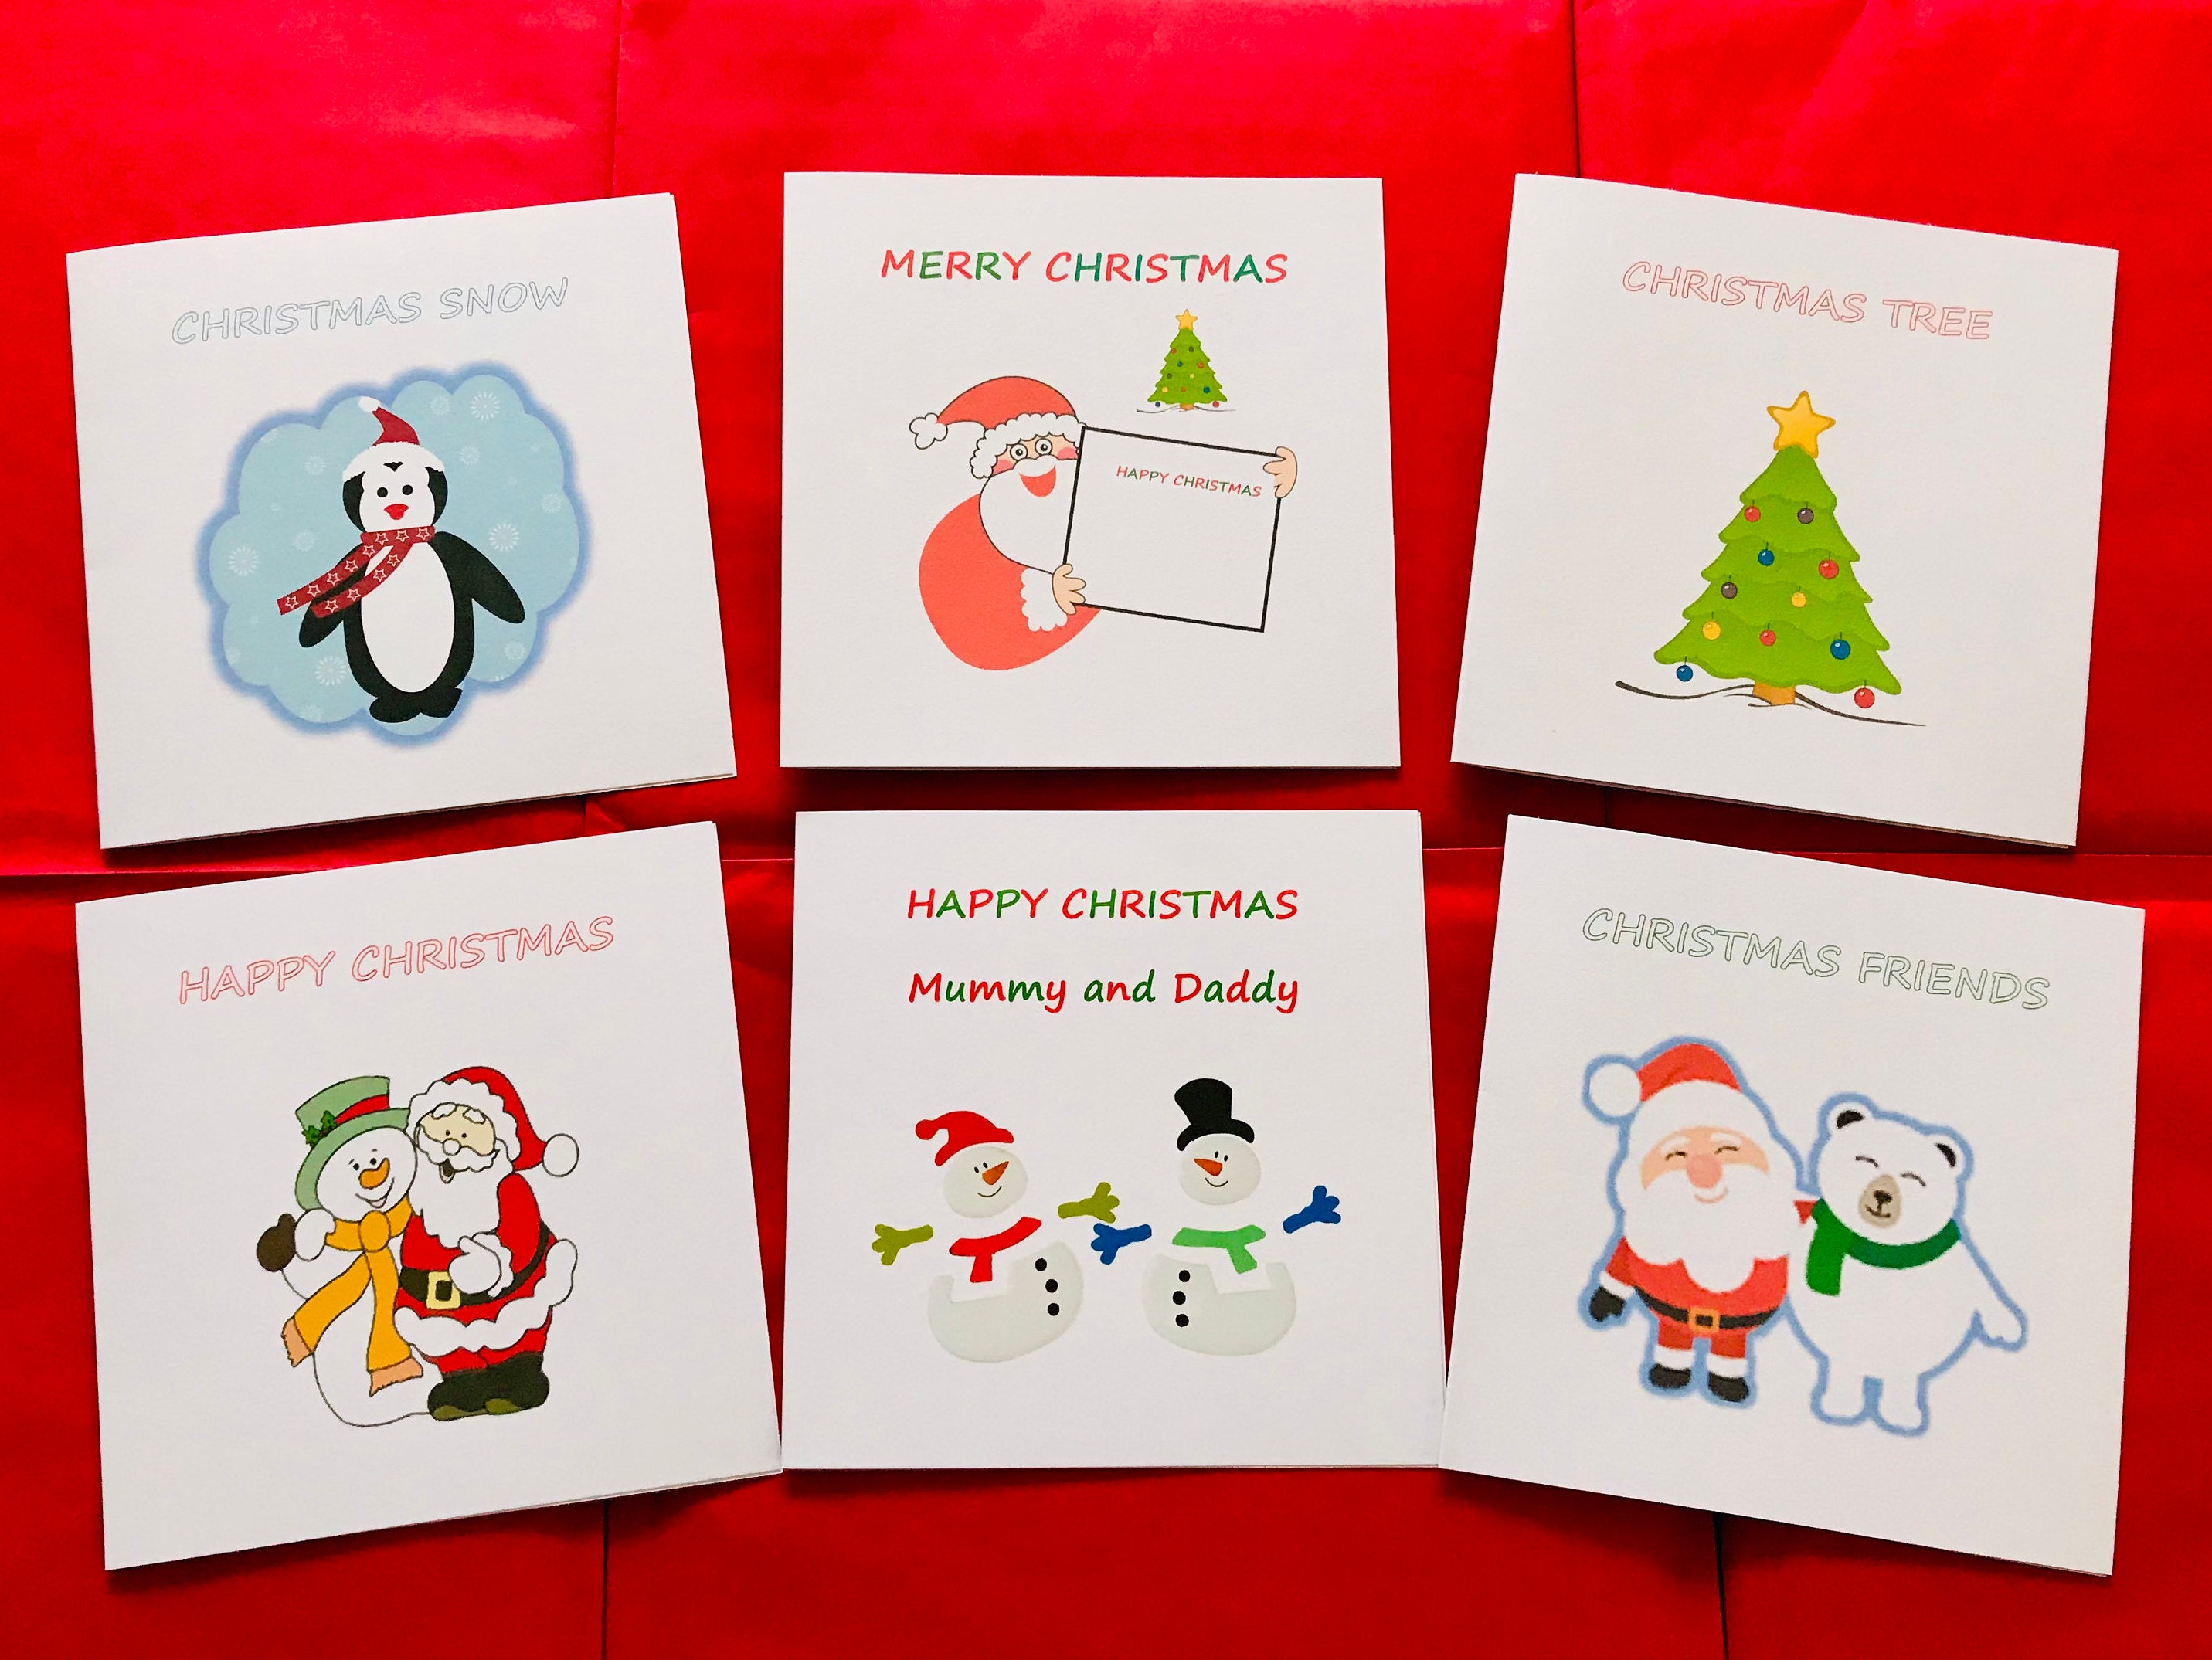 Christmas Card-Making Kit! Poems, Pictures, Text, & Characters! by  Illumismart